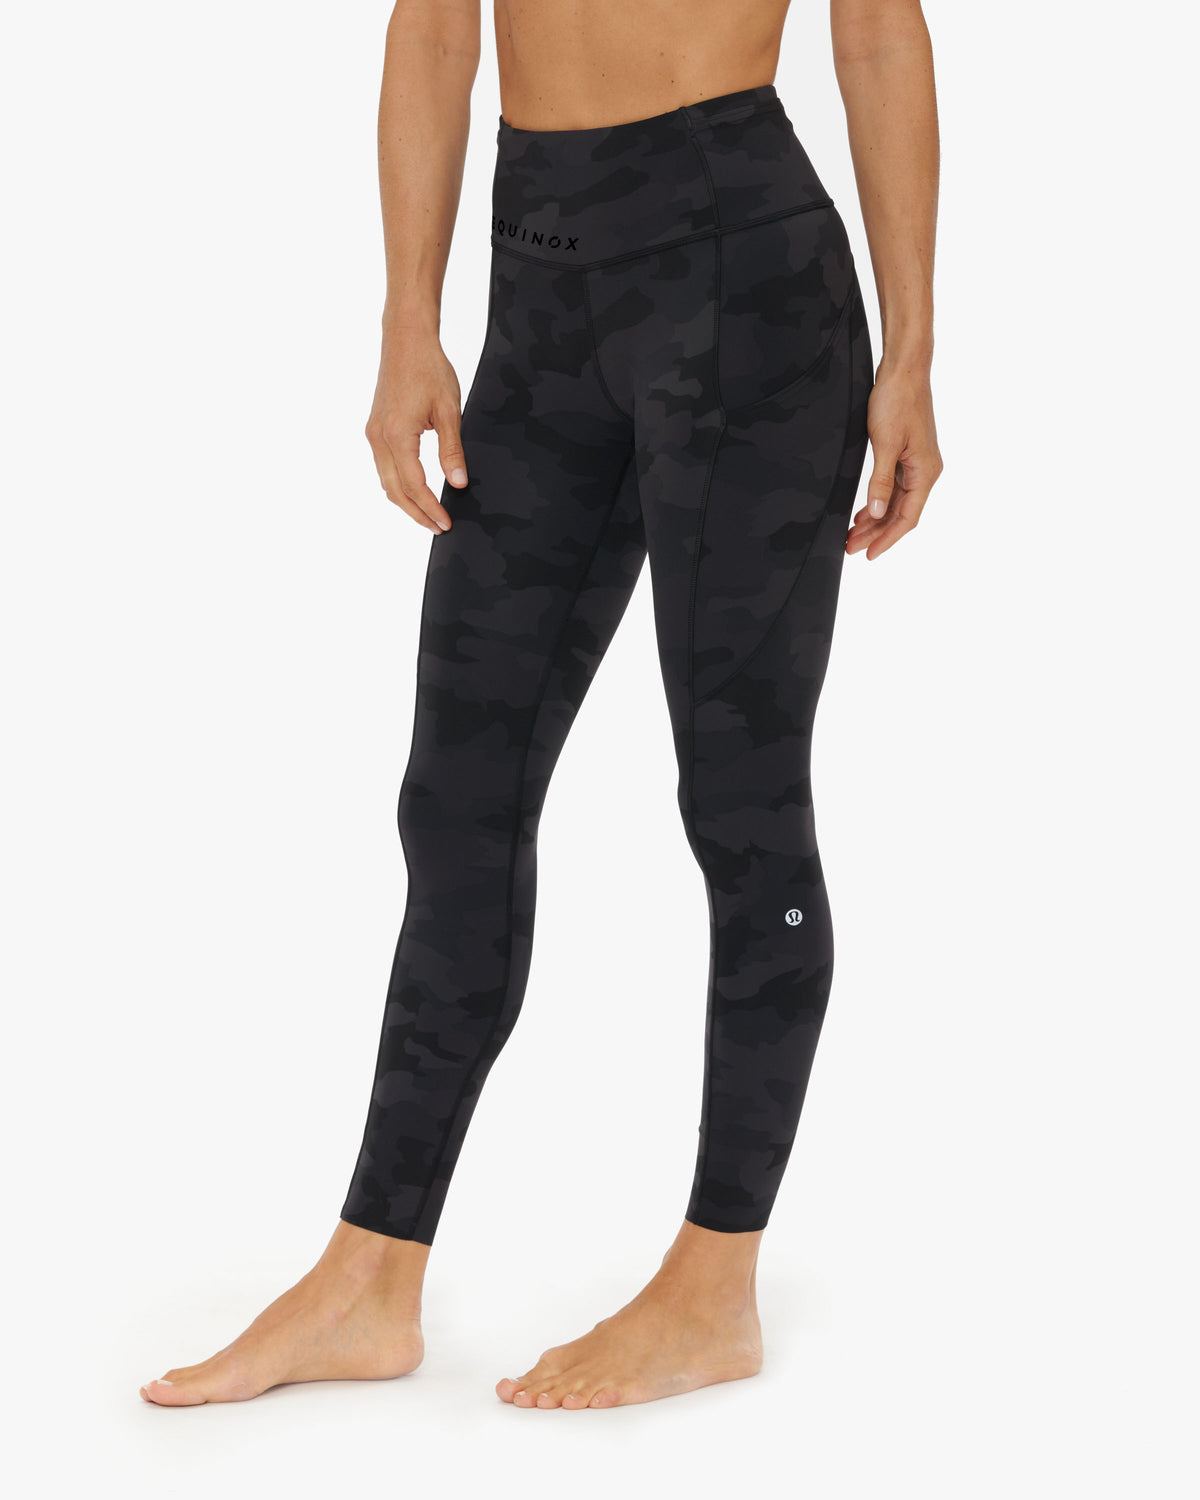 LULULEMON FAST AND FREE HR 7/8 TIGHT